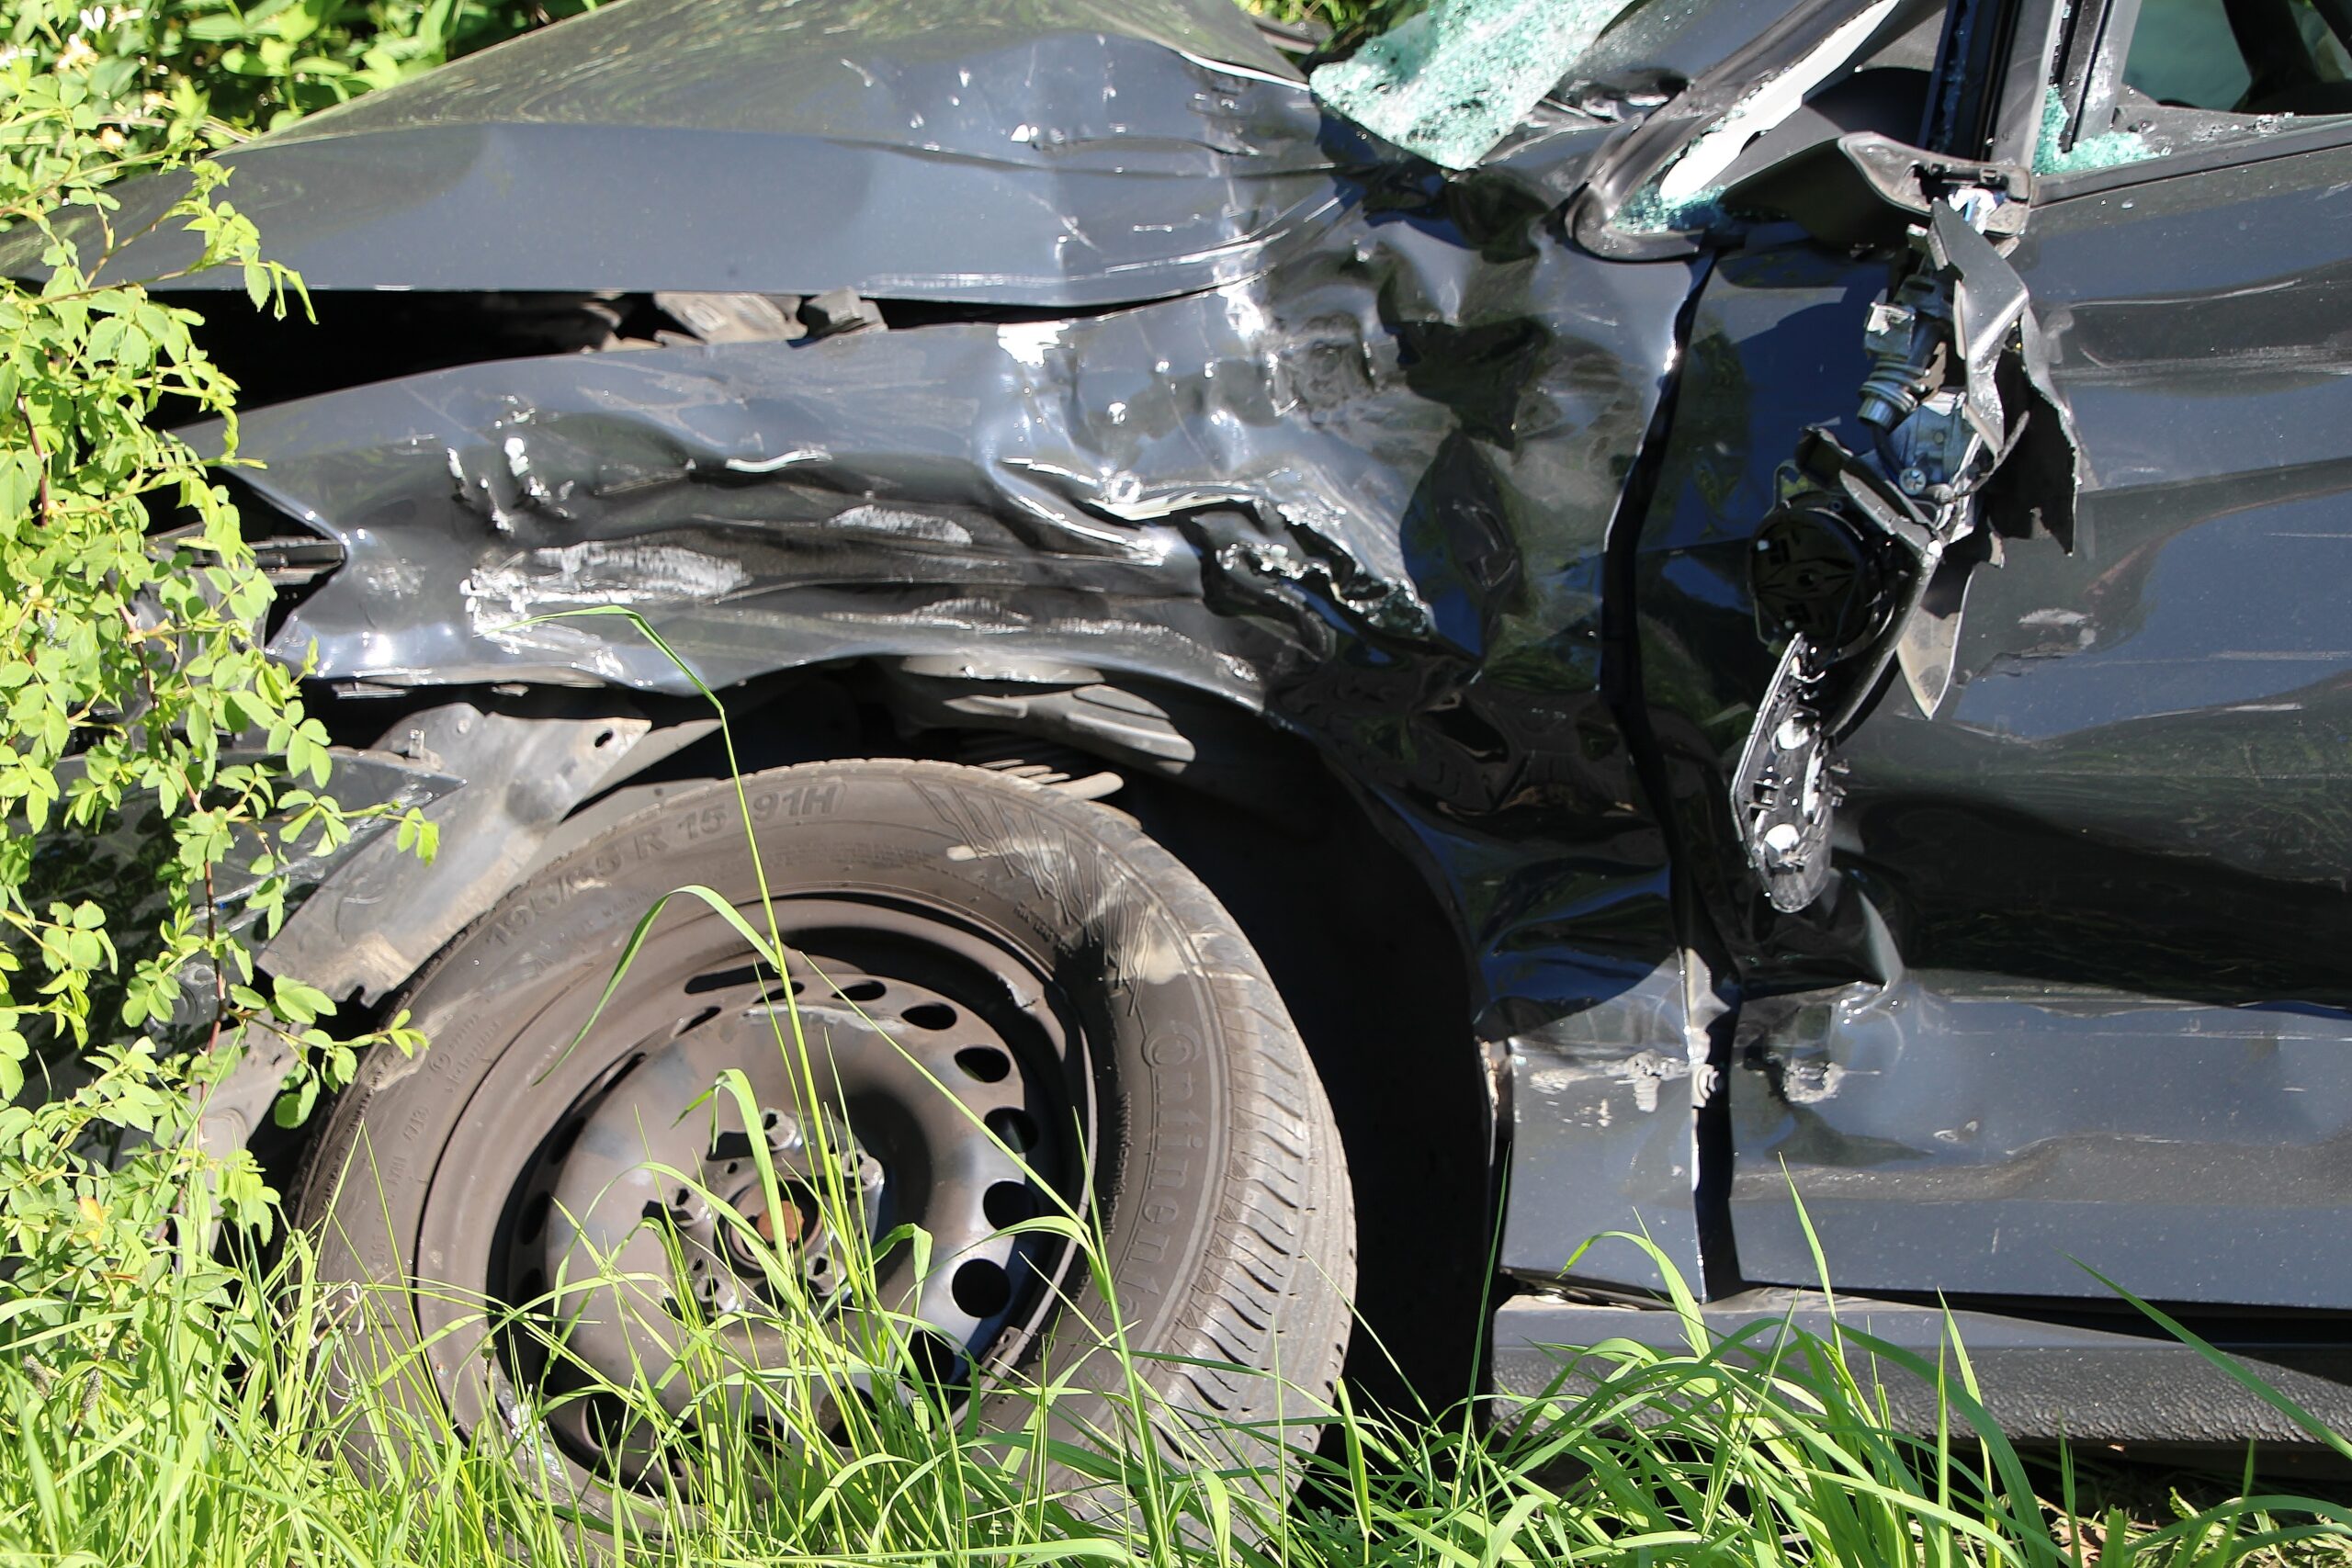 After a crash, contact truck wreck lawyers in Baton Rouge